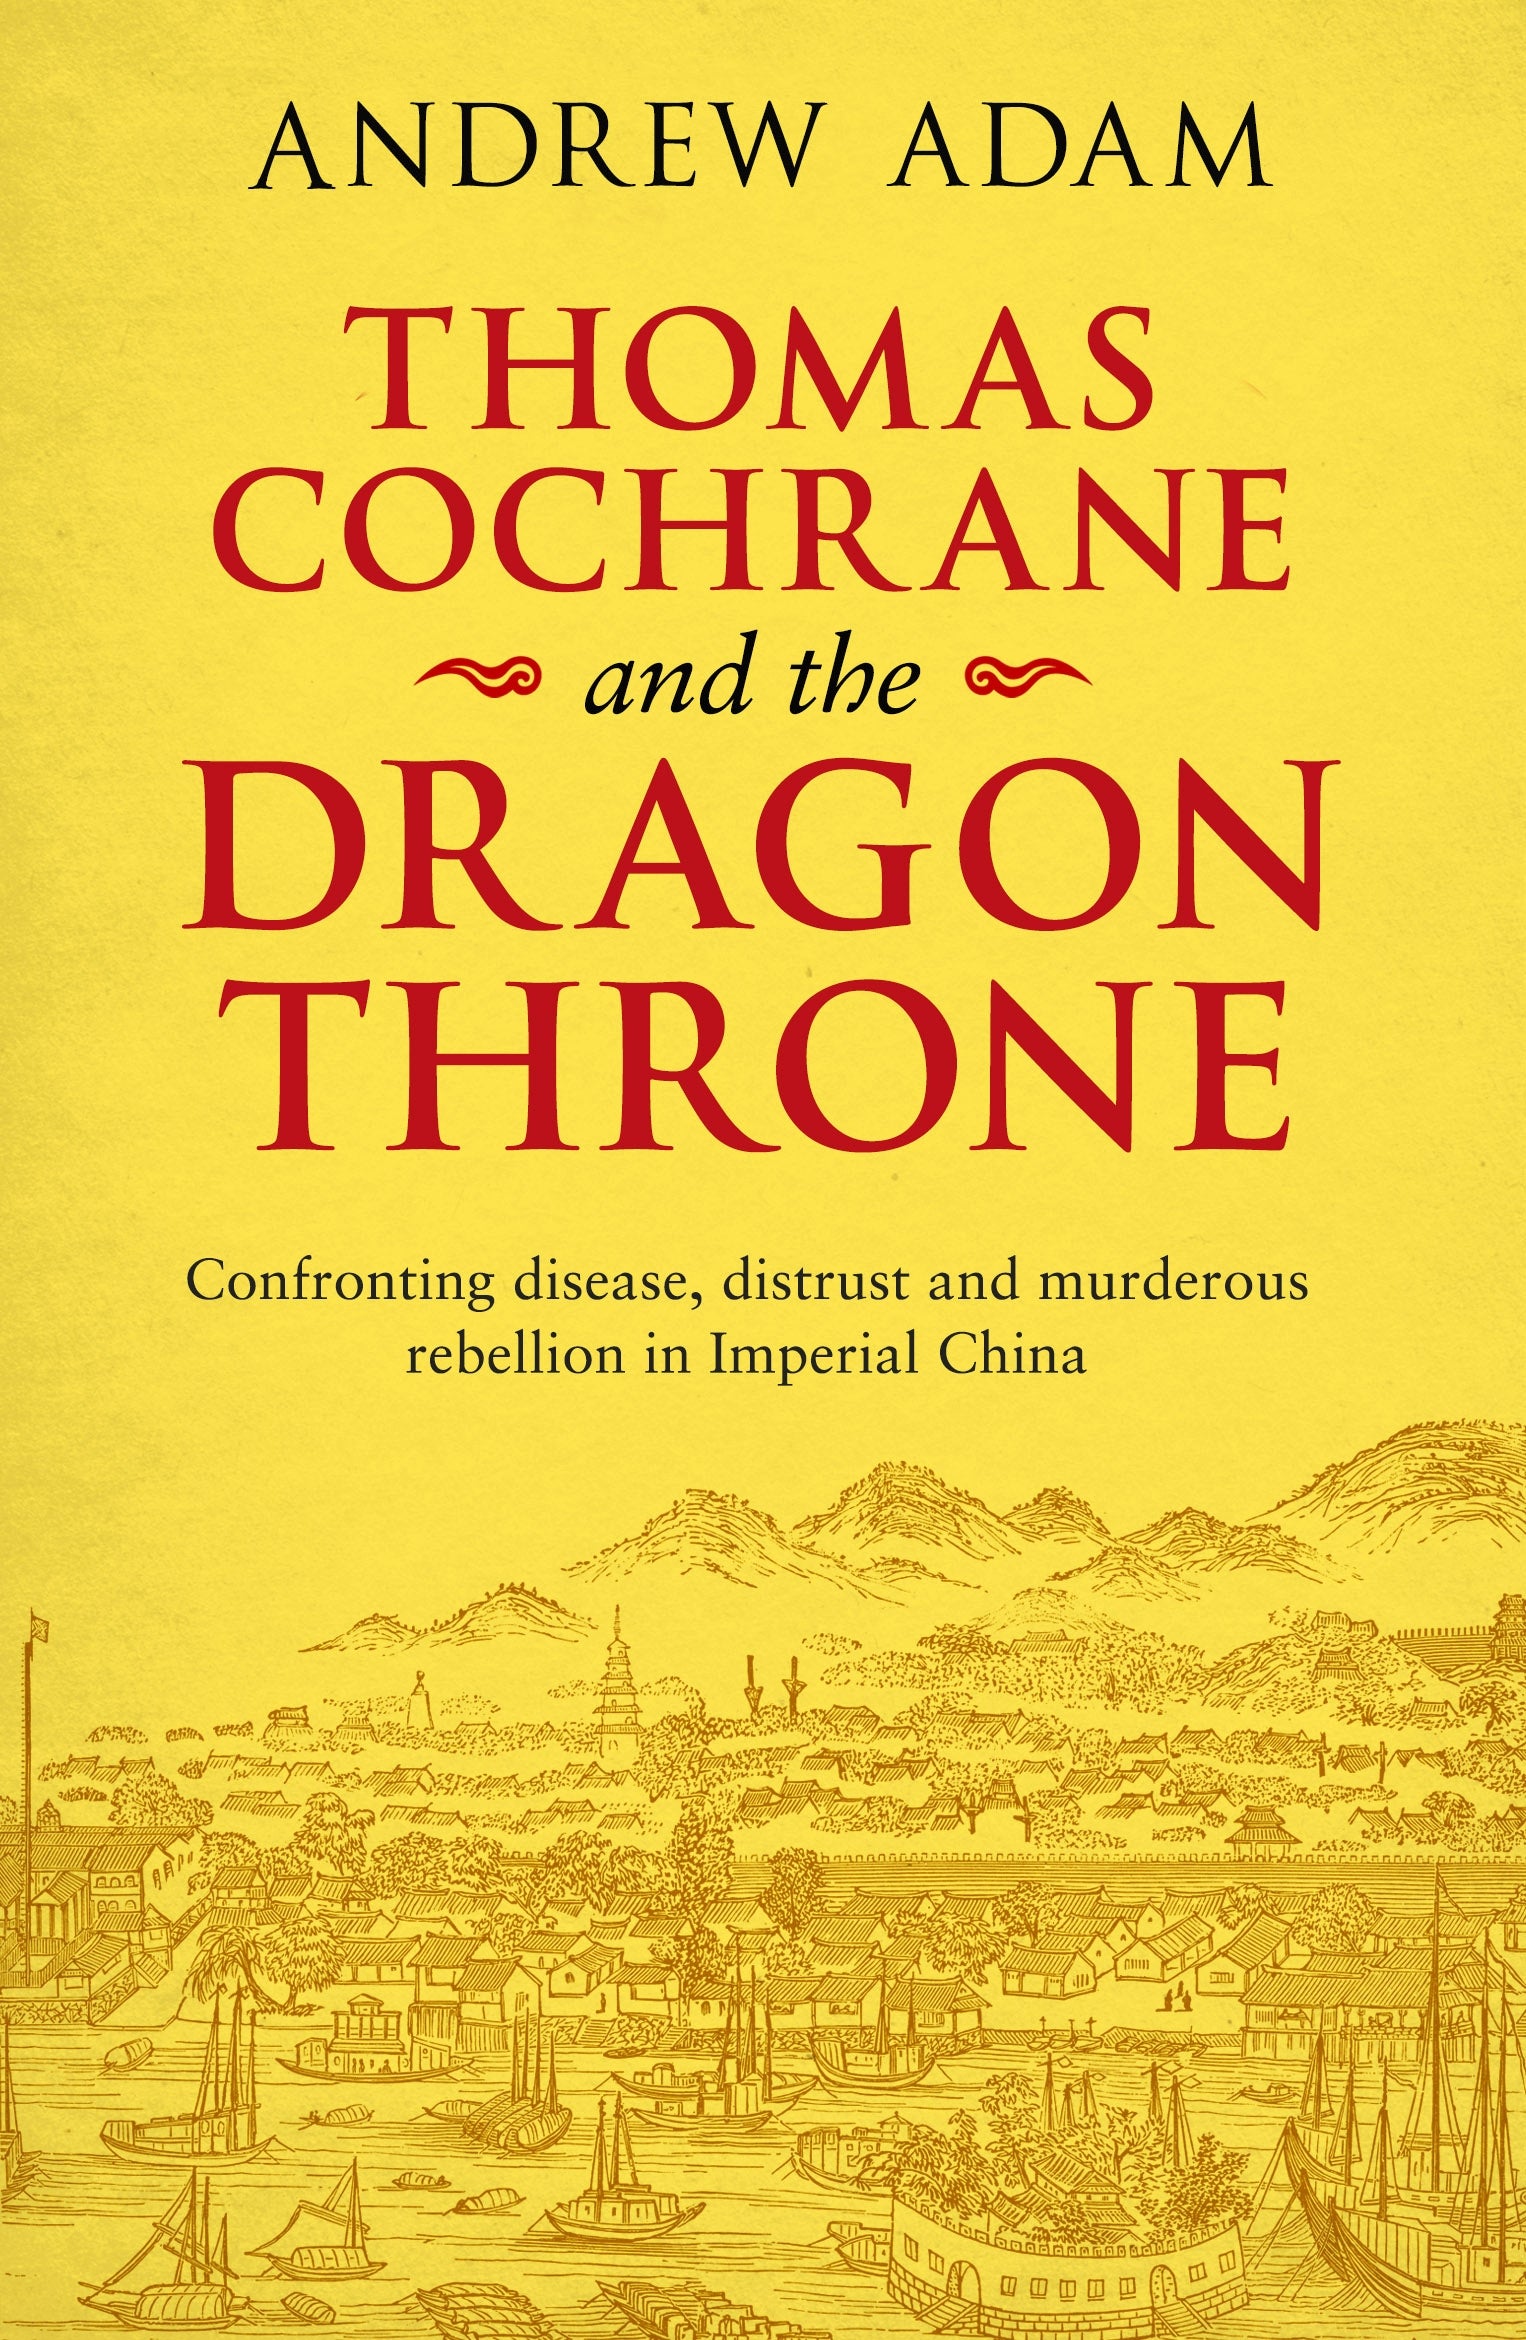 Image of Thomas Cochrane and the Dragon Throne other